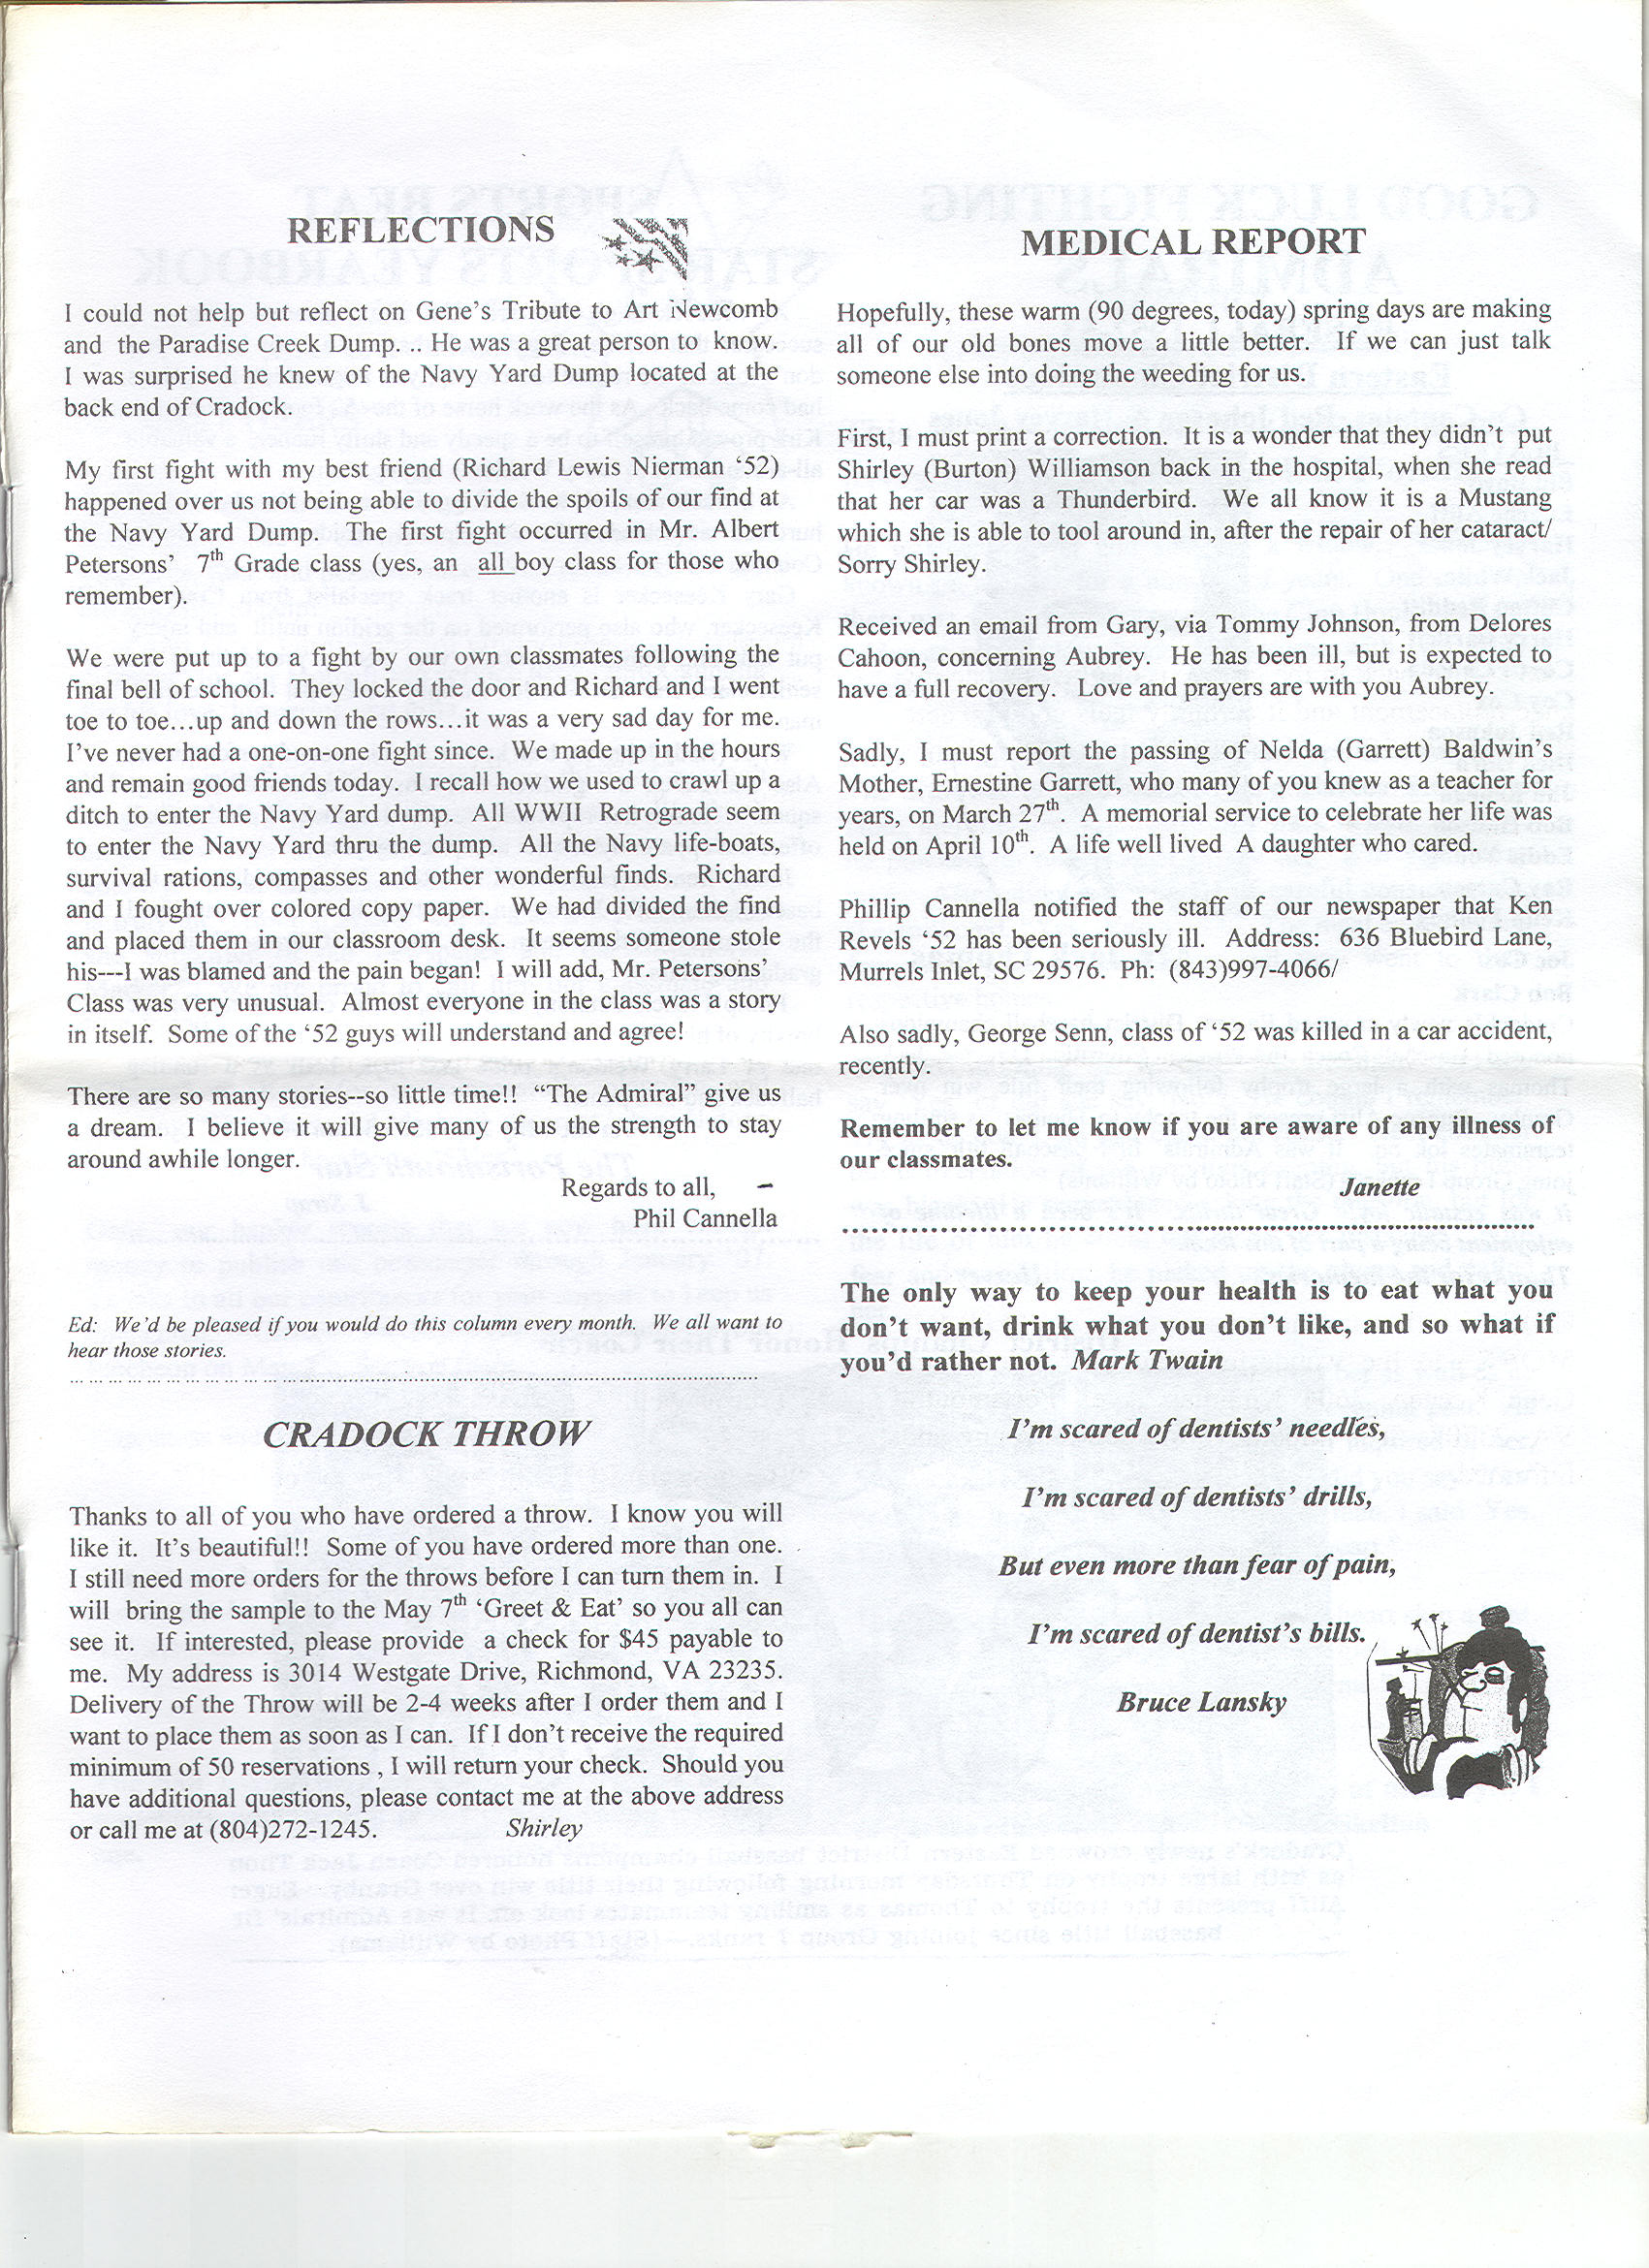 The Admiral - May 2006 - pg. 3